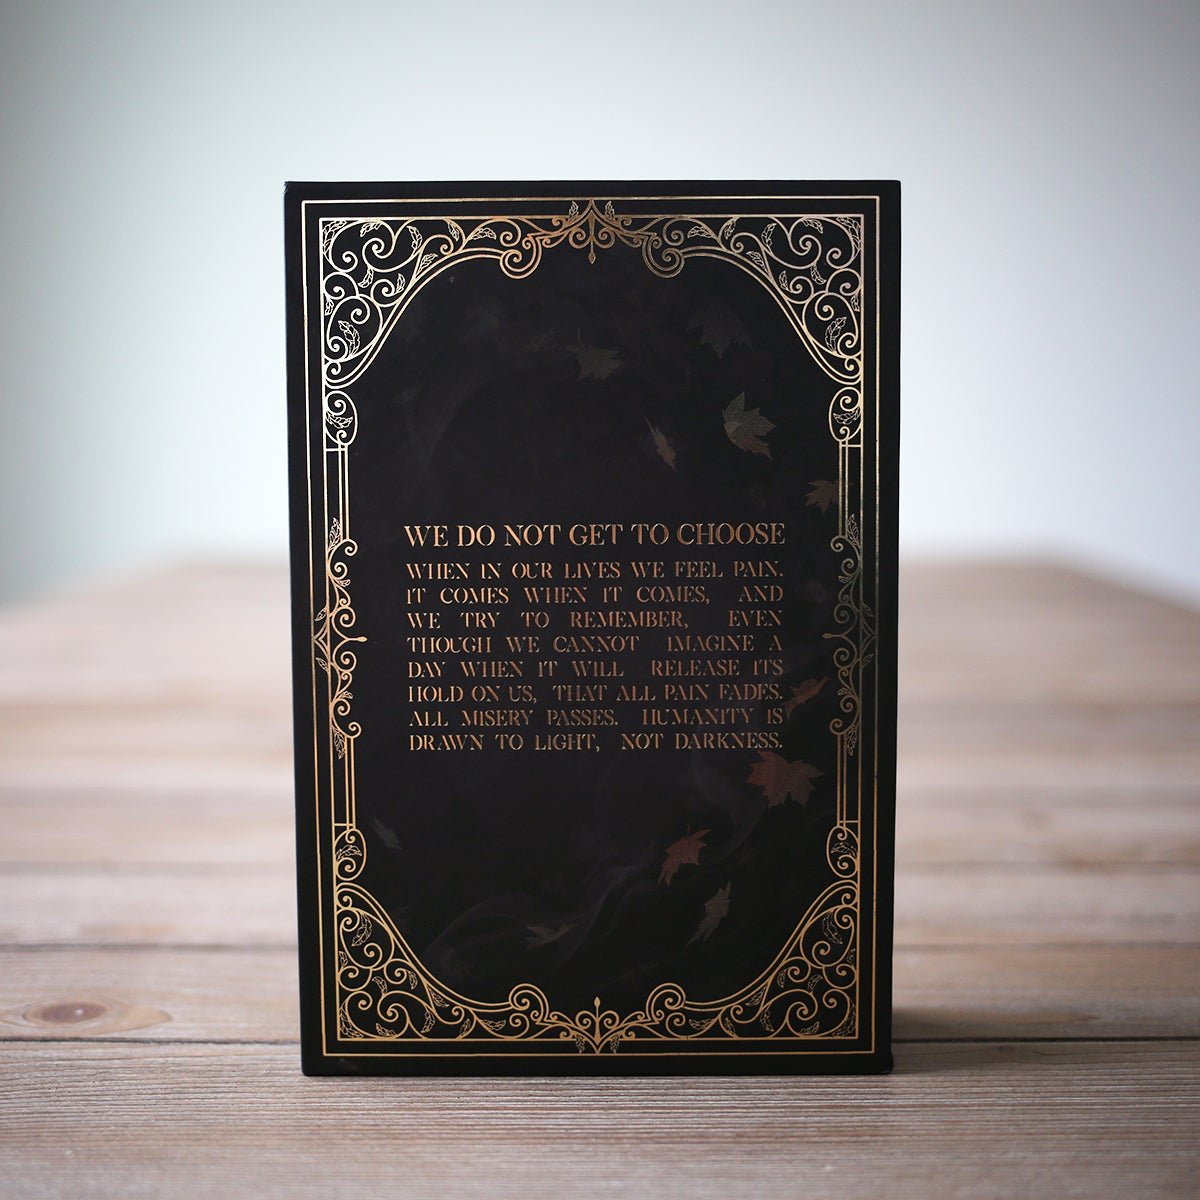 SLIPCASE - Chain of Gold from LitJoy Crate | Collectibles &amp; Gifts for Booklovers